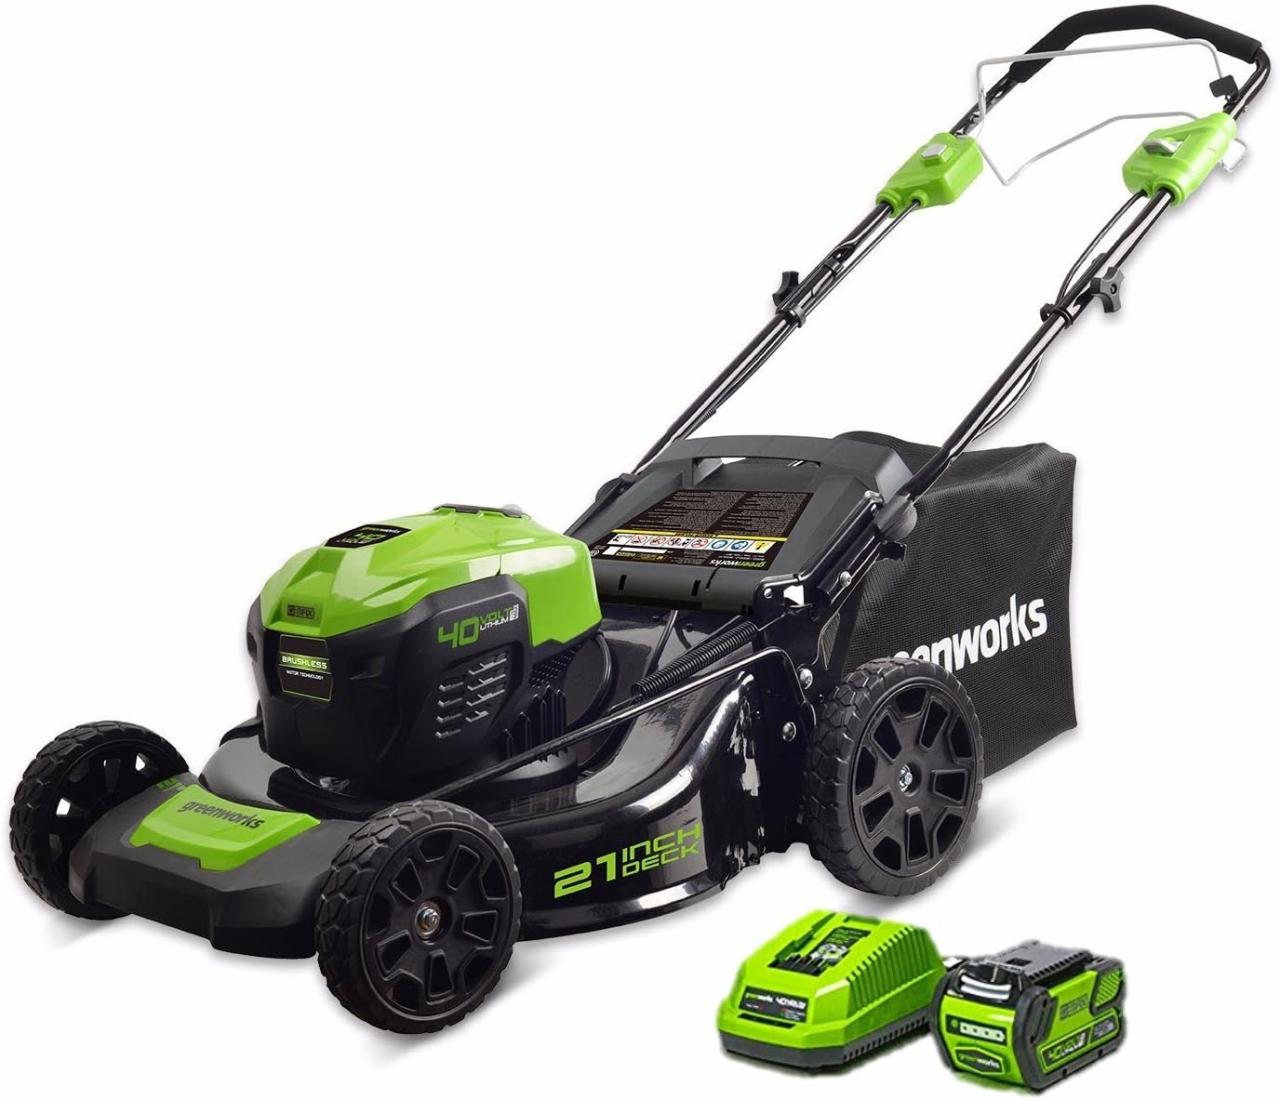 Self propelled cordless electric lawn mower